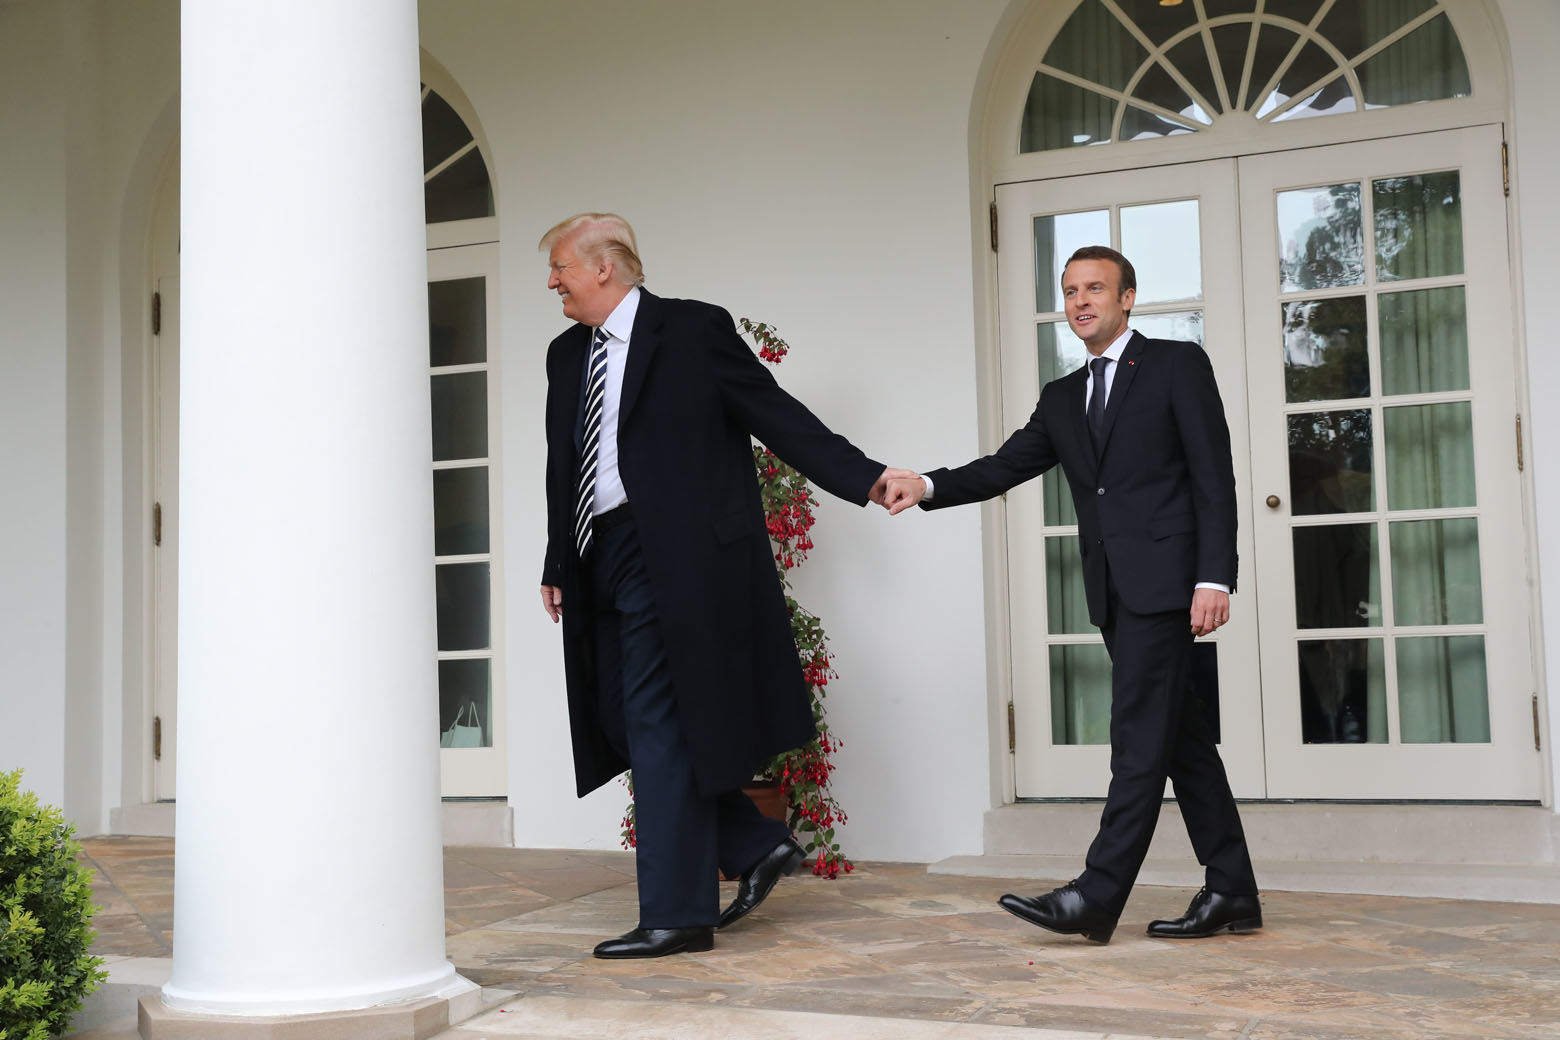 President Donald Trump and French President Emmanuel Macron walk to the Oval Office of the White House in Washington, Tuesday, April 24, 2018. Trump said the partnership he forged with Macron at the start of his presidency was a testament to the "enduring friendship that binds our two nations."  (AP Photo/Pablo Martinez Monsivais)